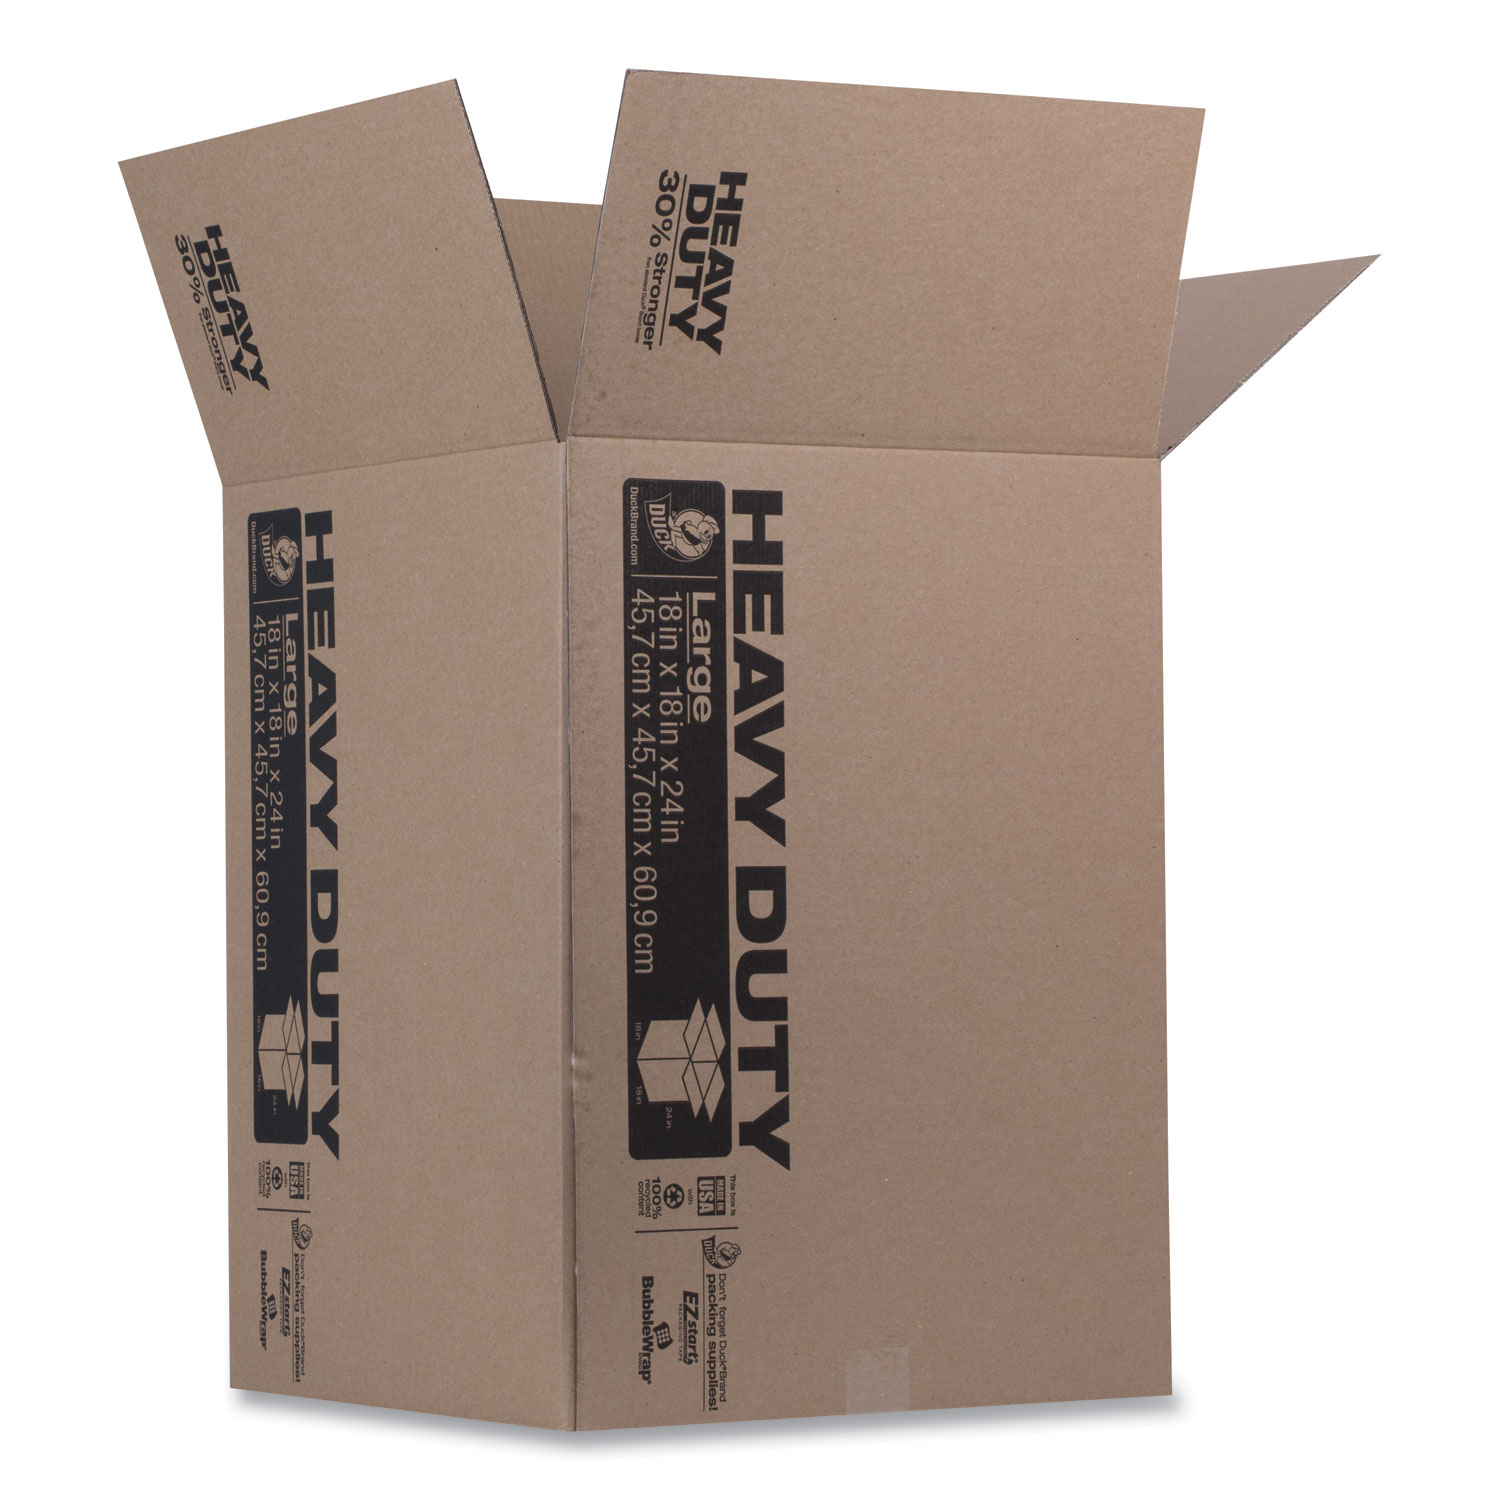  Duck 280727 Heavy-Duty Boxes, Regular Slotted Container (RSC), 18 x 18 x 24, Brown (DUC280727) 